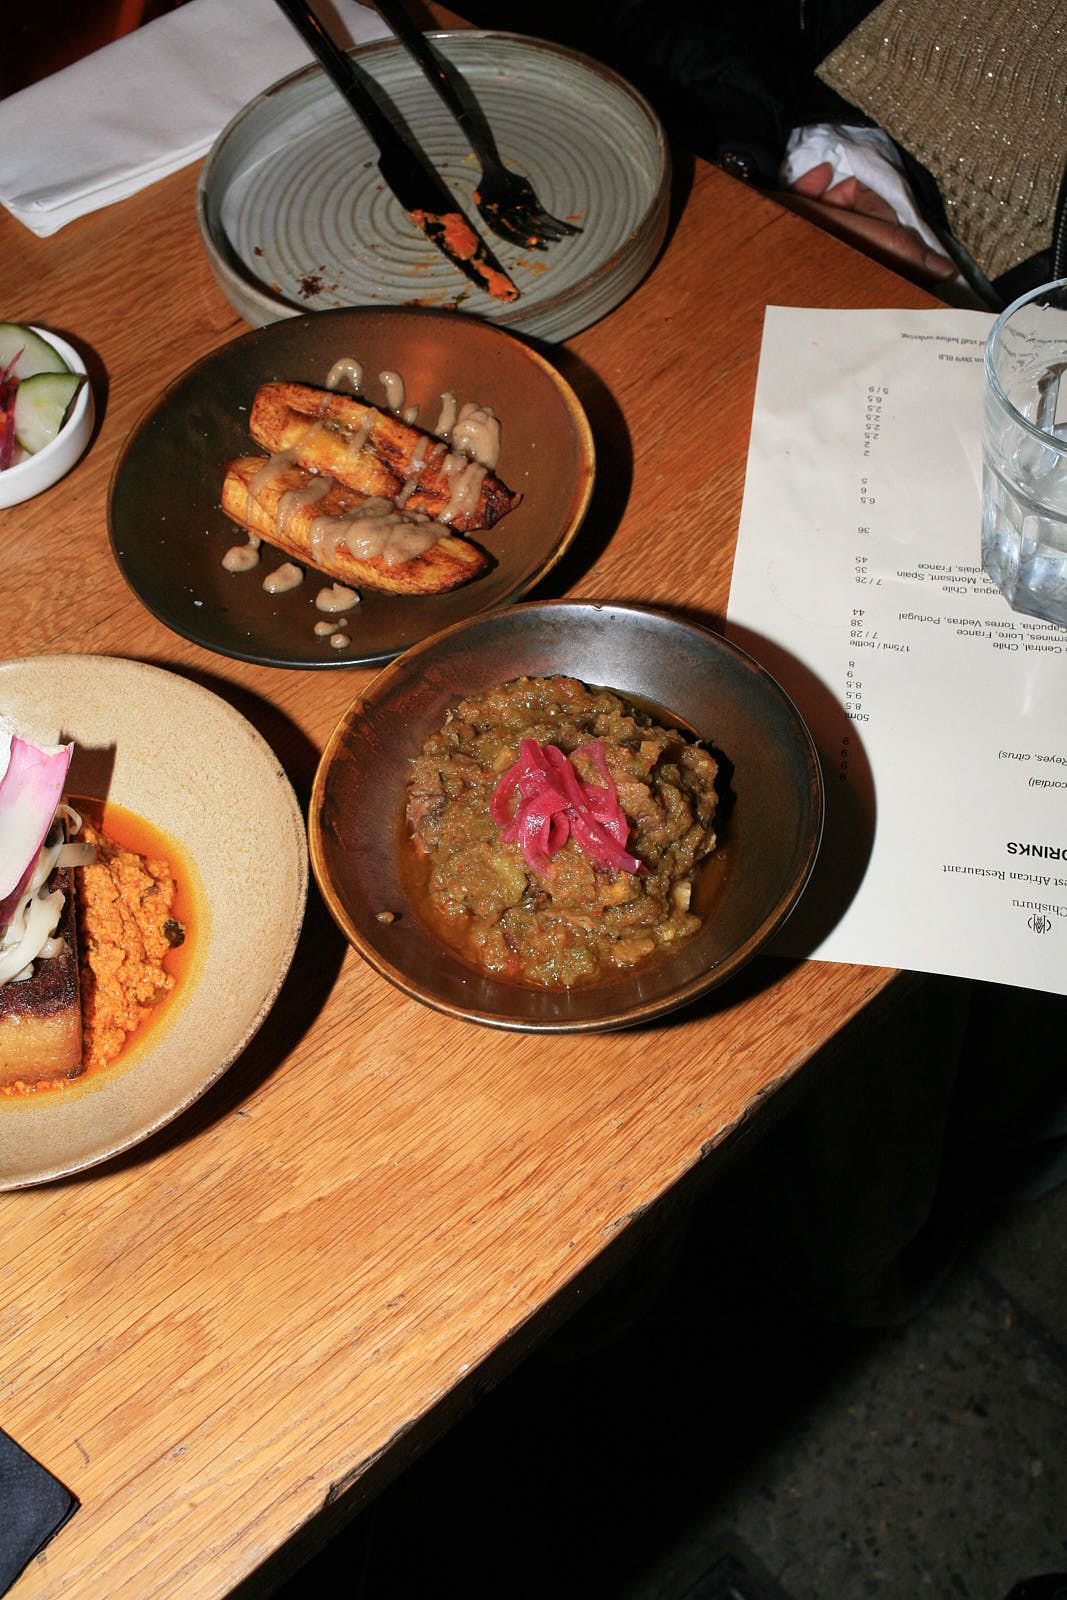 In the foreground: Goat ayamase, a stew with green peppers, garnished with pickled red onions. Plantain behind. 